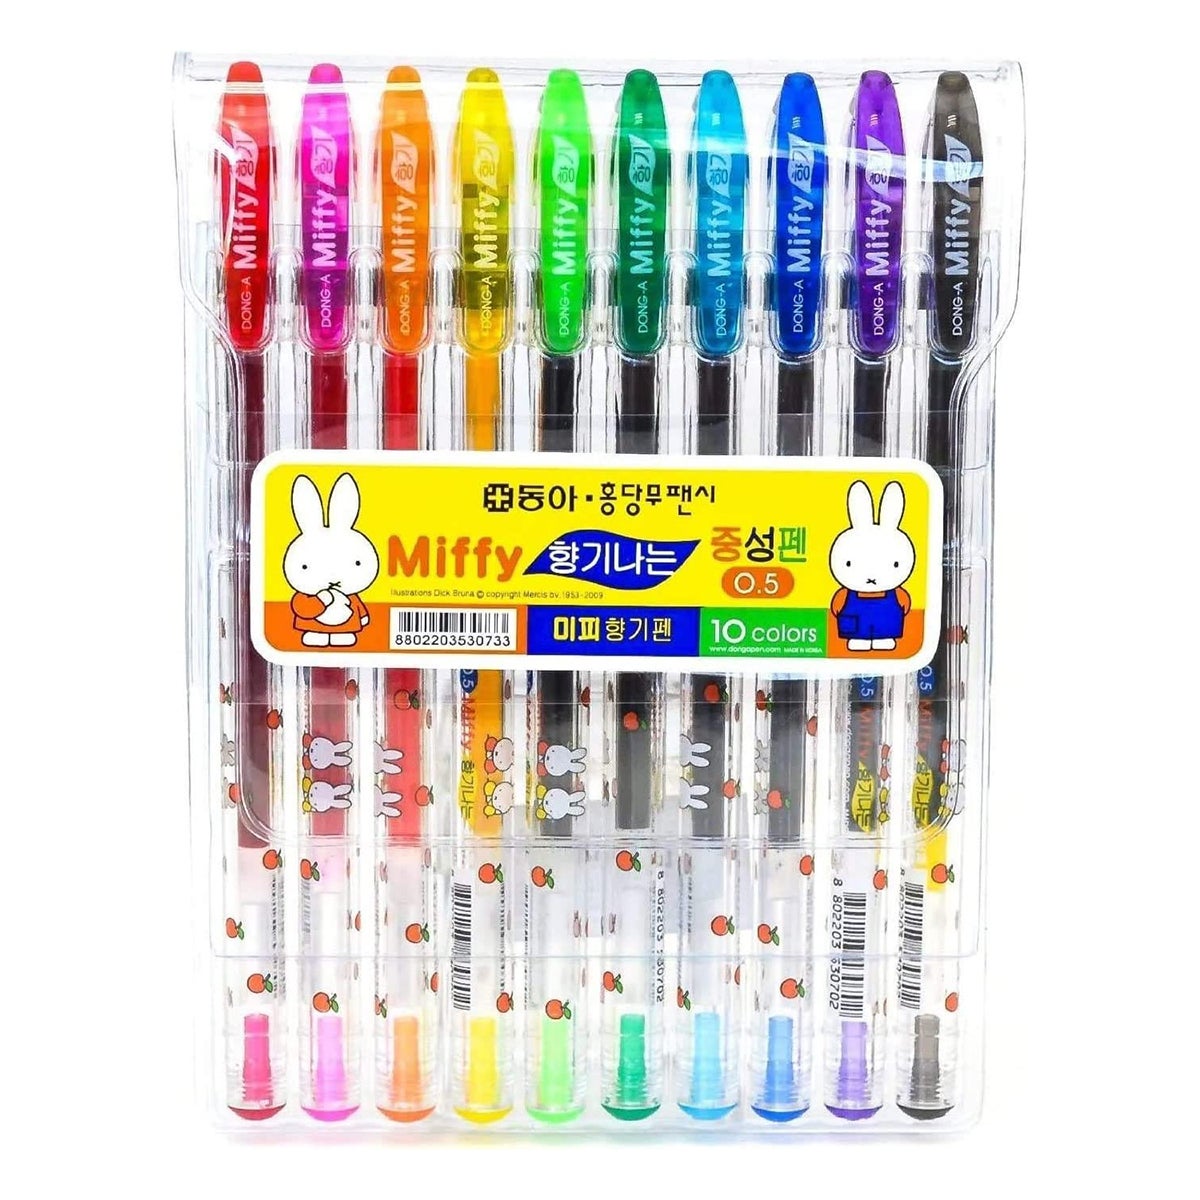 DONG-A Miffy Bunny Scented Gel Roller Ball Pens - 10 Color Set main product image 1